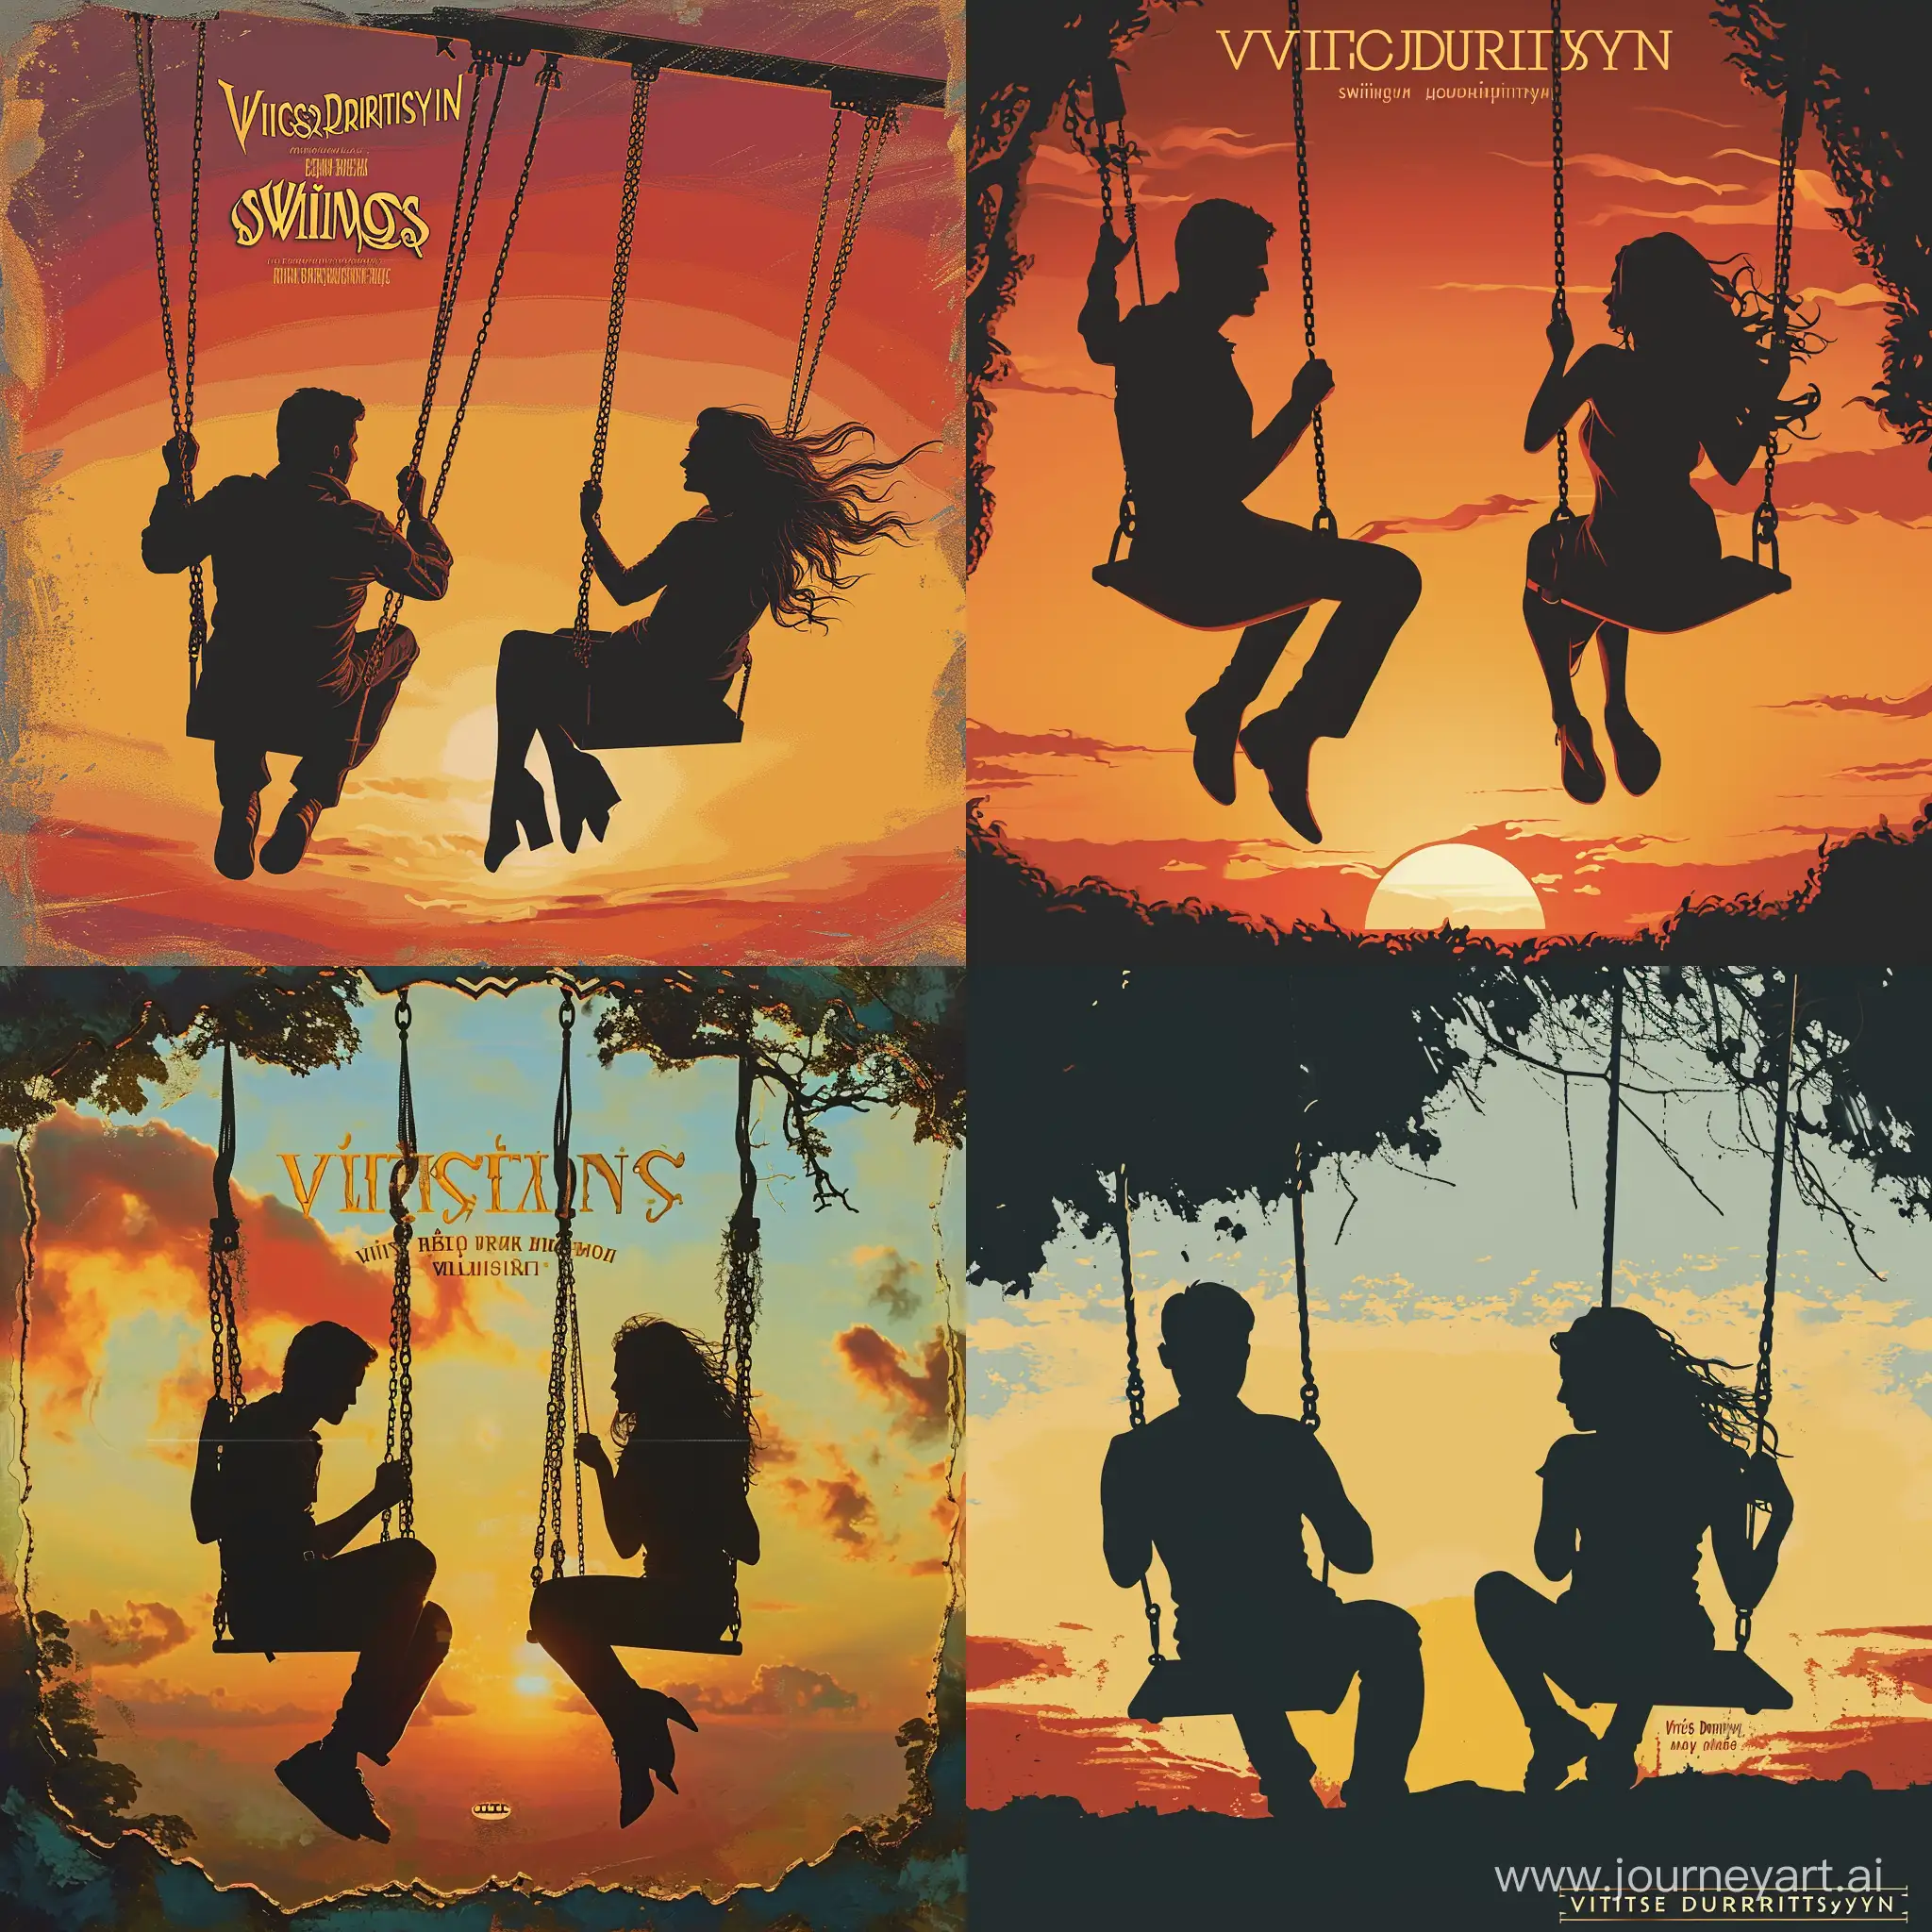 Romantic-Silhouettes-on-Swings-at-Sunset-Victor-Duritsyn-Swings-Album-Cover